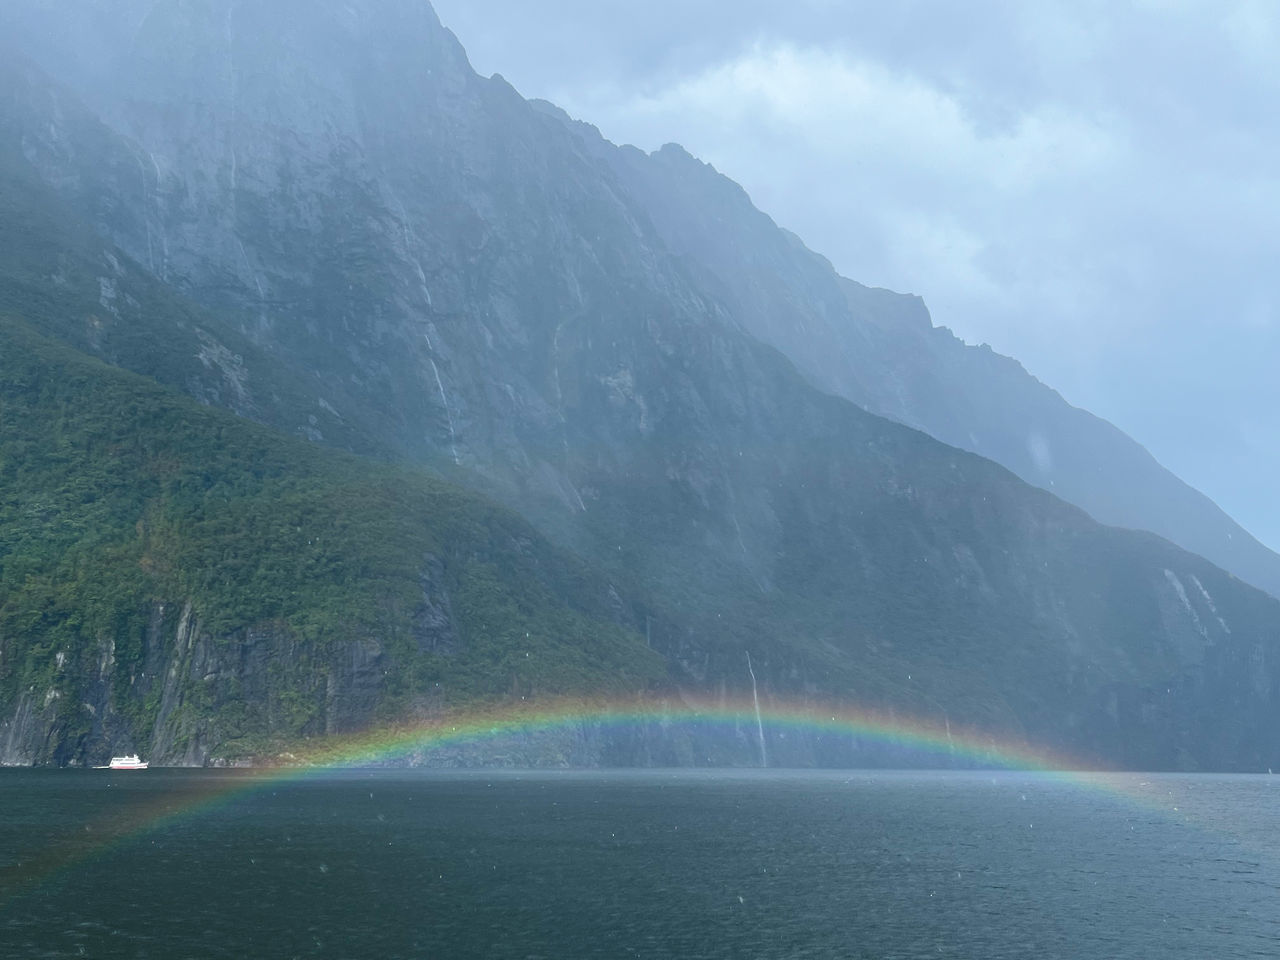 rainbow, mountain, scenics - nature, water, environment, beauty in nature, nature, landscape, land, mountain range, no people, fog, travel, lake, cloud, travel destinations, sky, multi colored, tree, tranquility, tourism, forest, cold temperature, outdoors, tranquil scene, plant, glacial landform, day, idyllic, mountain peak